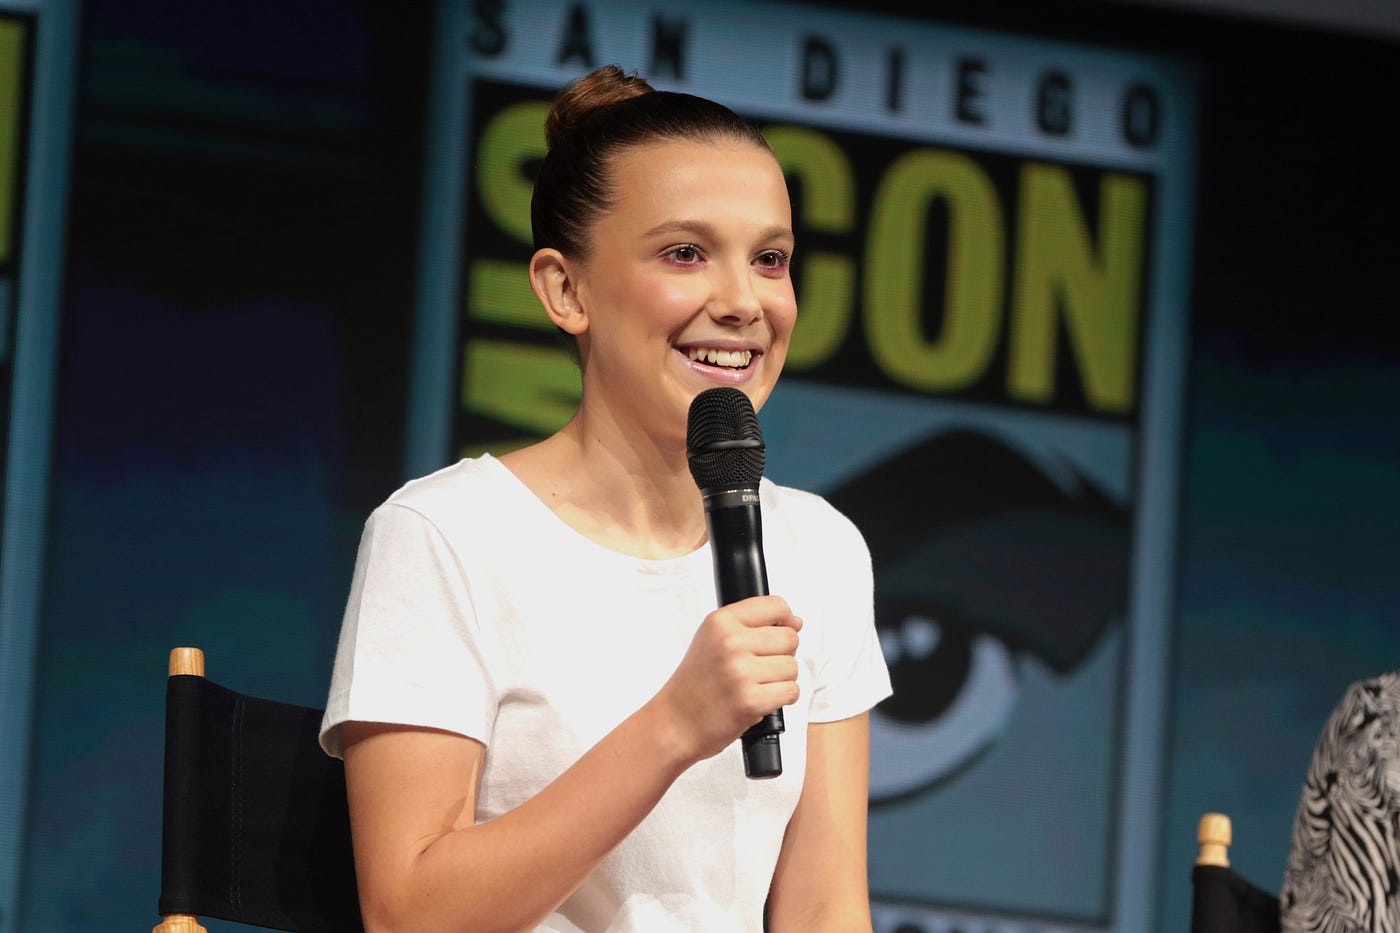 Millie Bobby Brown Is Feminist Because a Psychic Told Her So